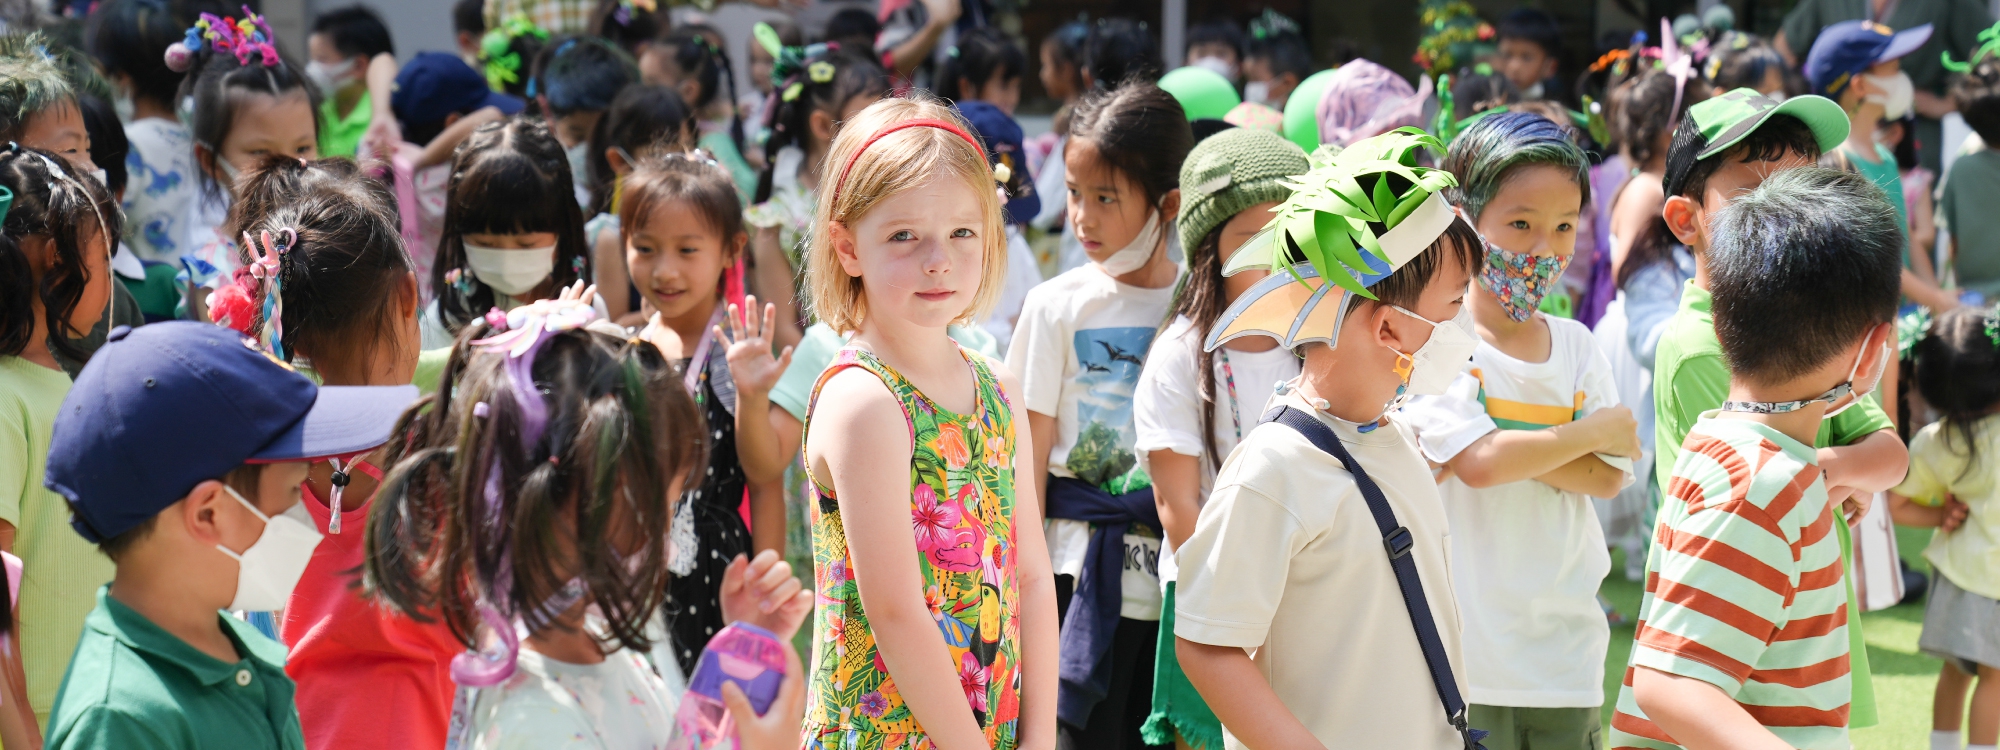 King's Bangkok's Crazy Green Hair Day for charity